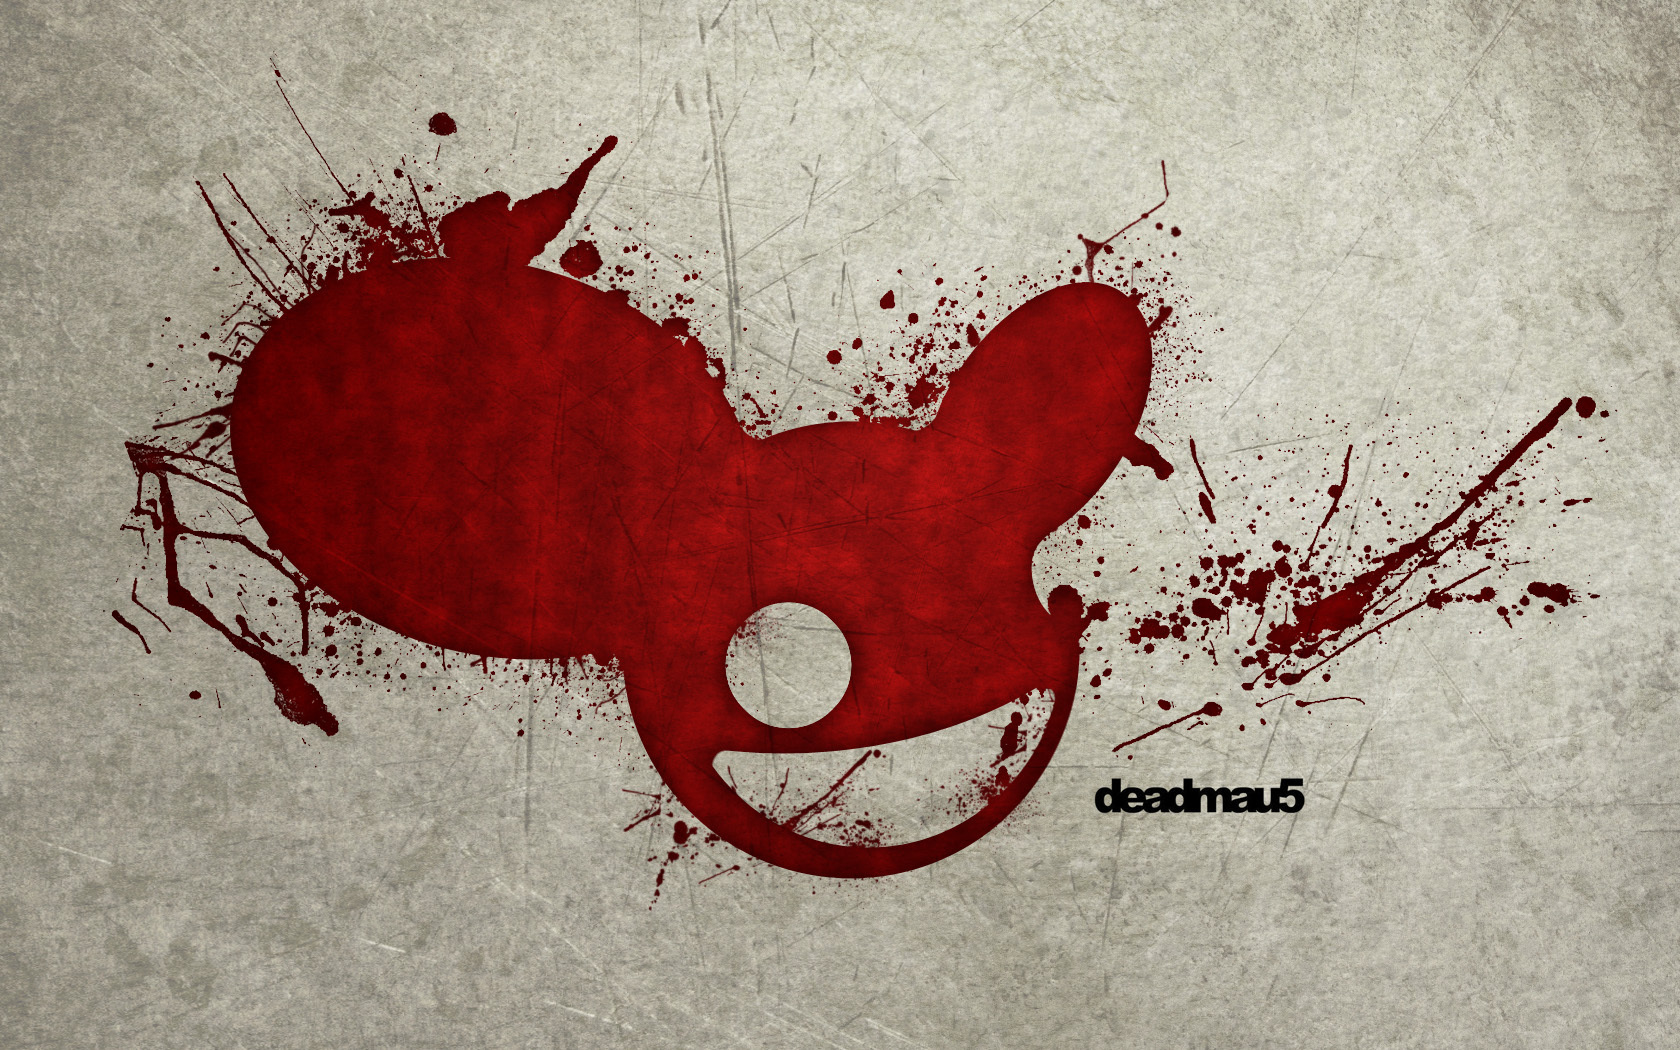 46 Deadmau5 wallpapers for your PC, mobile phone, iPad, iPhone.